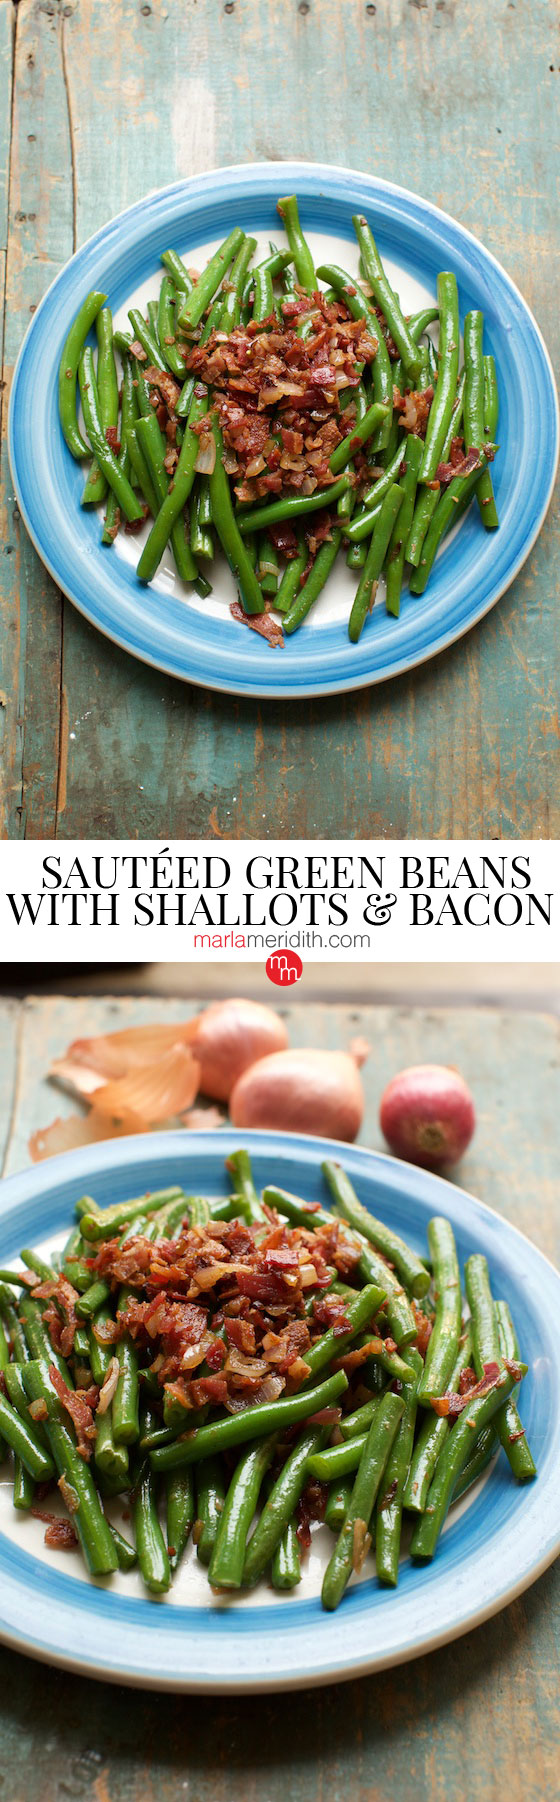 Sautéed Green Beans with Shallots & Bacon will be the hit at your holiday table! MarlaMeridith.com #recipe #bacon #greenbeans